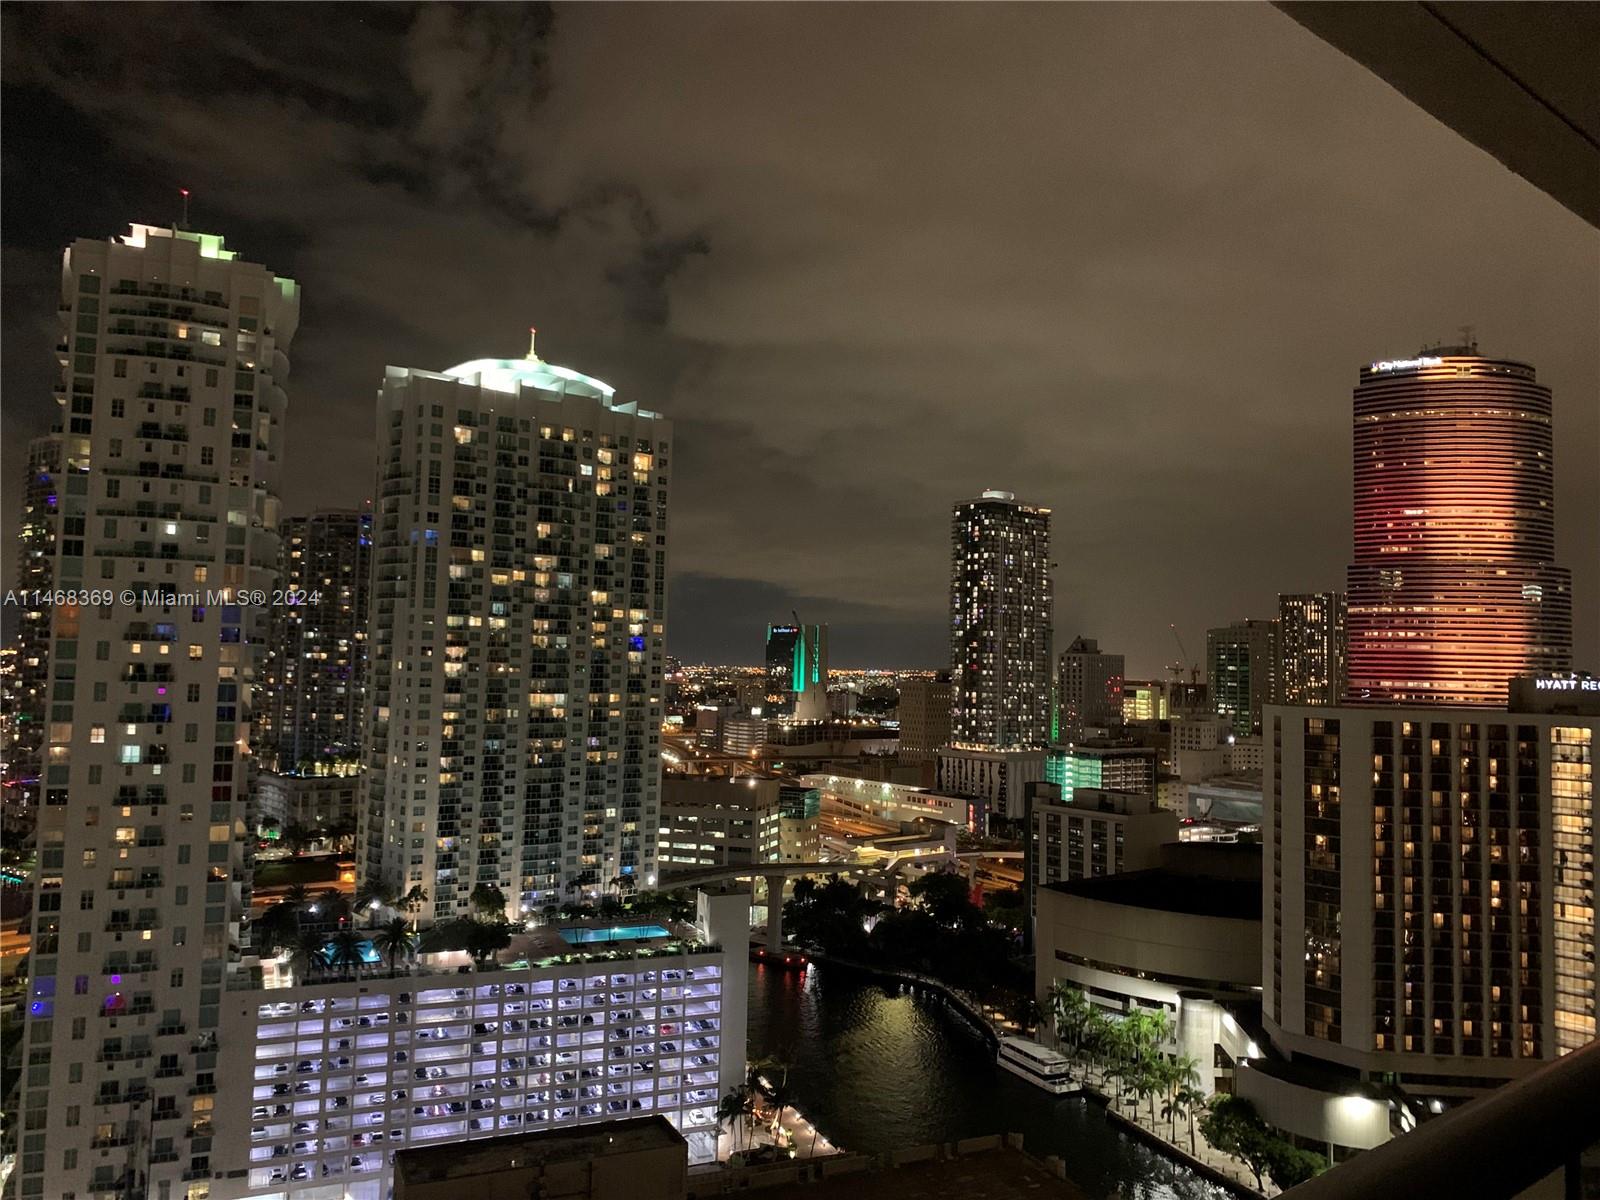 Icon Brickell *. Short Term *. Beautiful 1 bedroom and 1 bathroom apartment. Totally furnished! Amazing City view. Water, internet, electricity, valet parking, and basic cable are included in the rent. Amenities include a 5-star SPA, infinity pools, a great fitness center, and free yoga, pilates, and spinning classes. 24-hour Concierge. First/last months in advance + $2000 security deposit). THIS APARTMENT DOESN'T ALLOW SUBLEASING. Short-term lease is subject to tax.